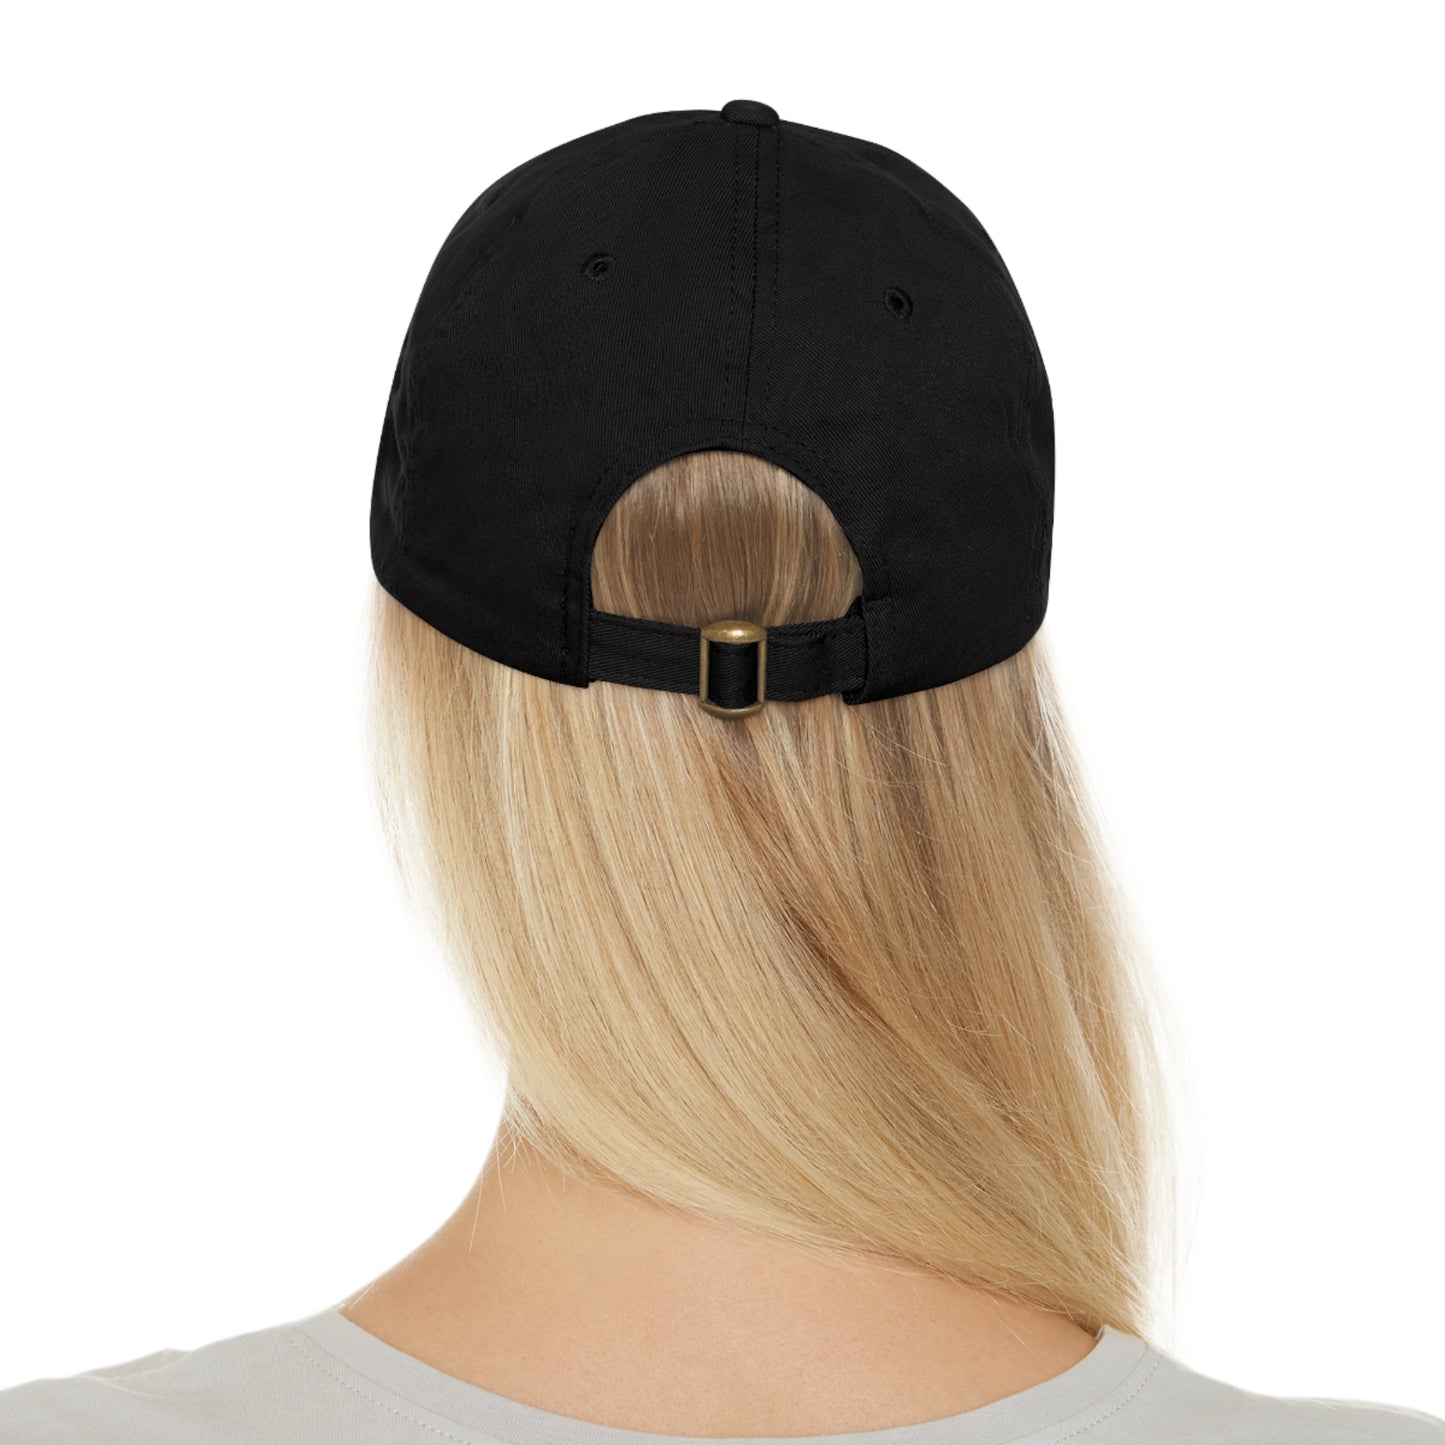 Nope. Not Today - Dad Hat with Leather Patch (Rectangle)